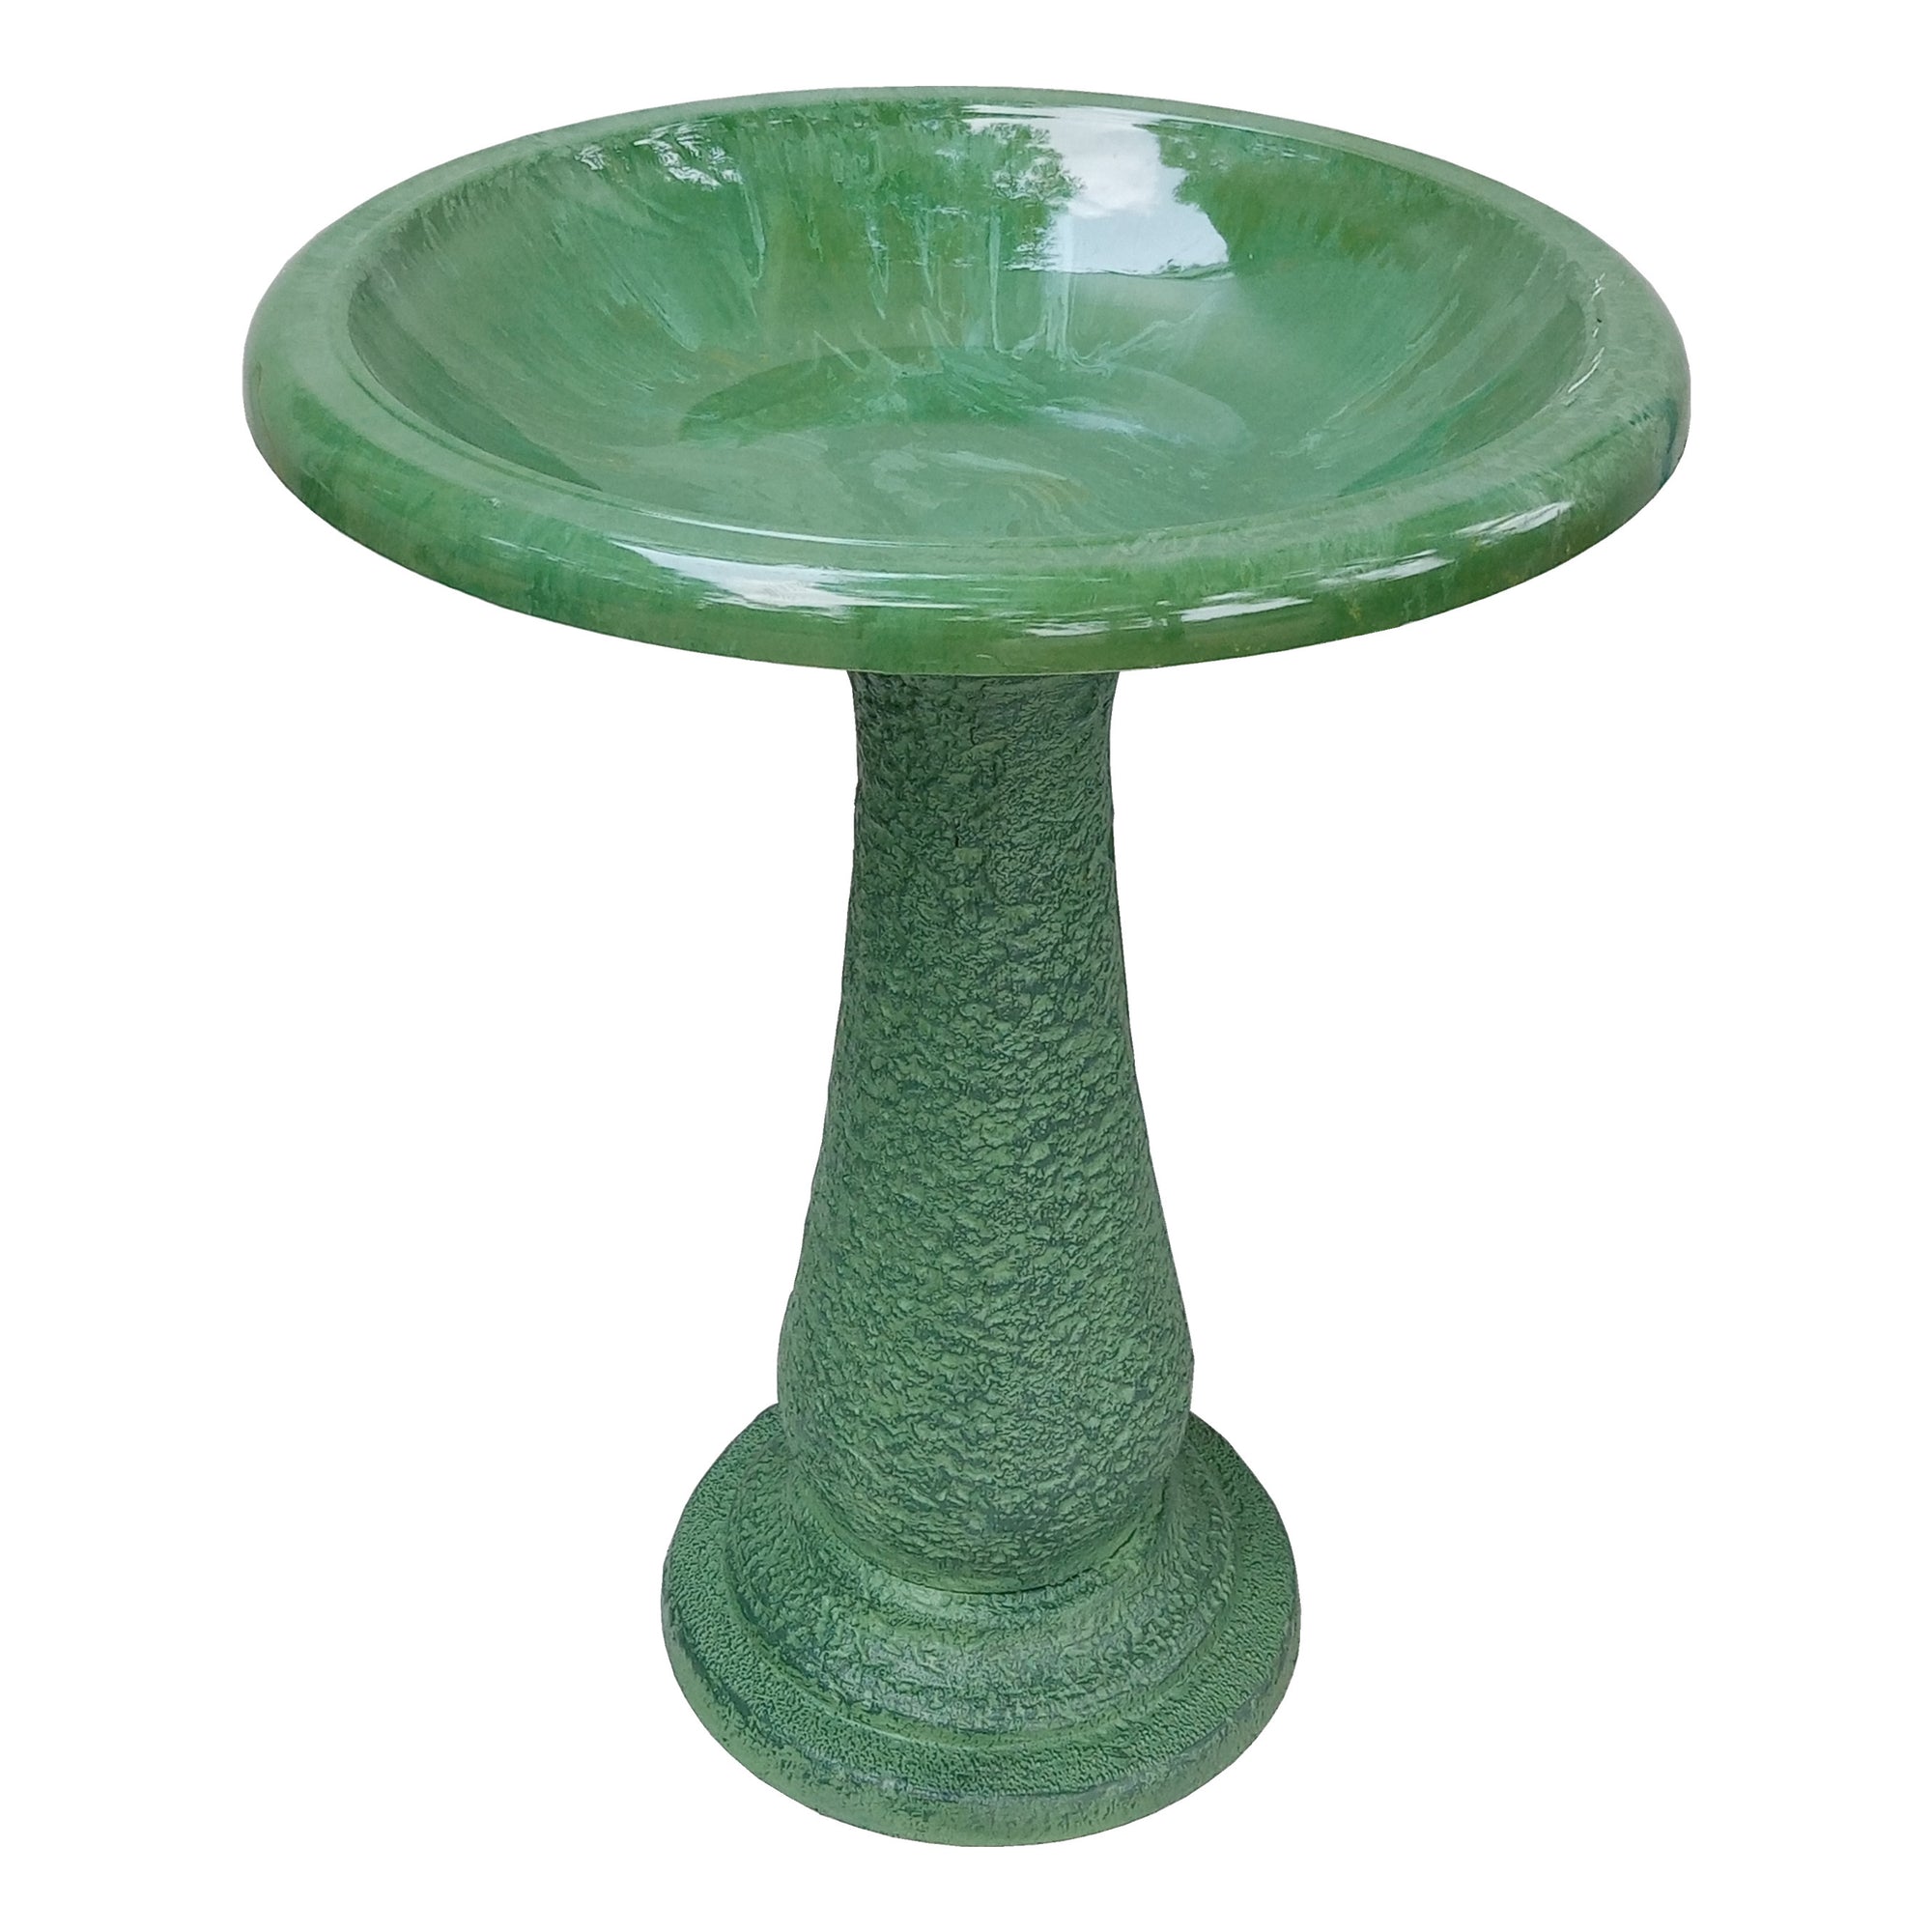 Kale Green Fiber Clay Birdbath. Made of 70% clay, 25% plastic, and 5% fiber. Impact and shatter-resistant. UV protection. 19"D x 24"H 21"H base, 8 lbs.